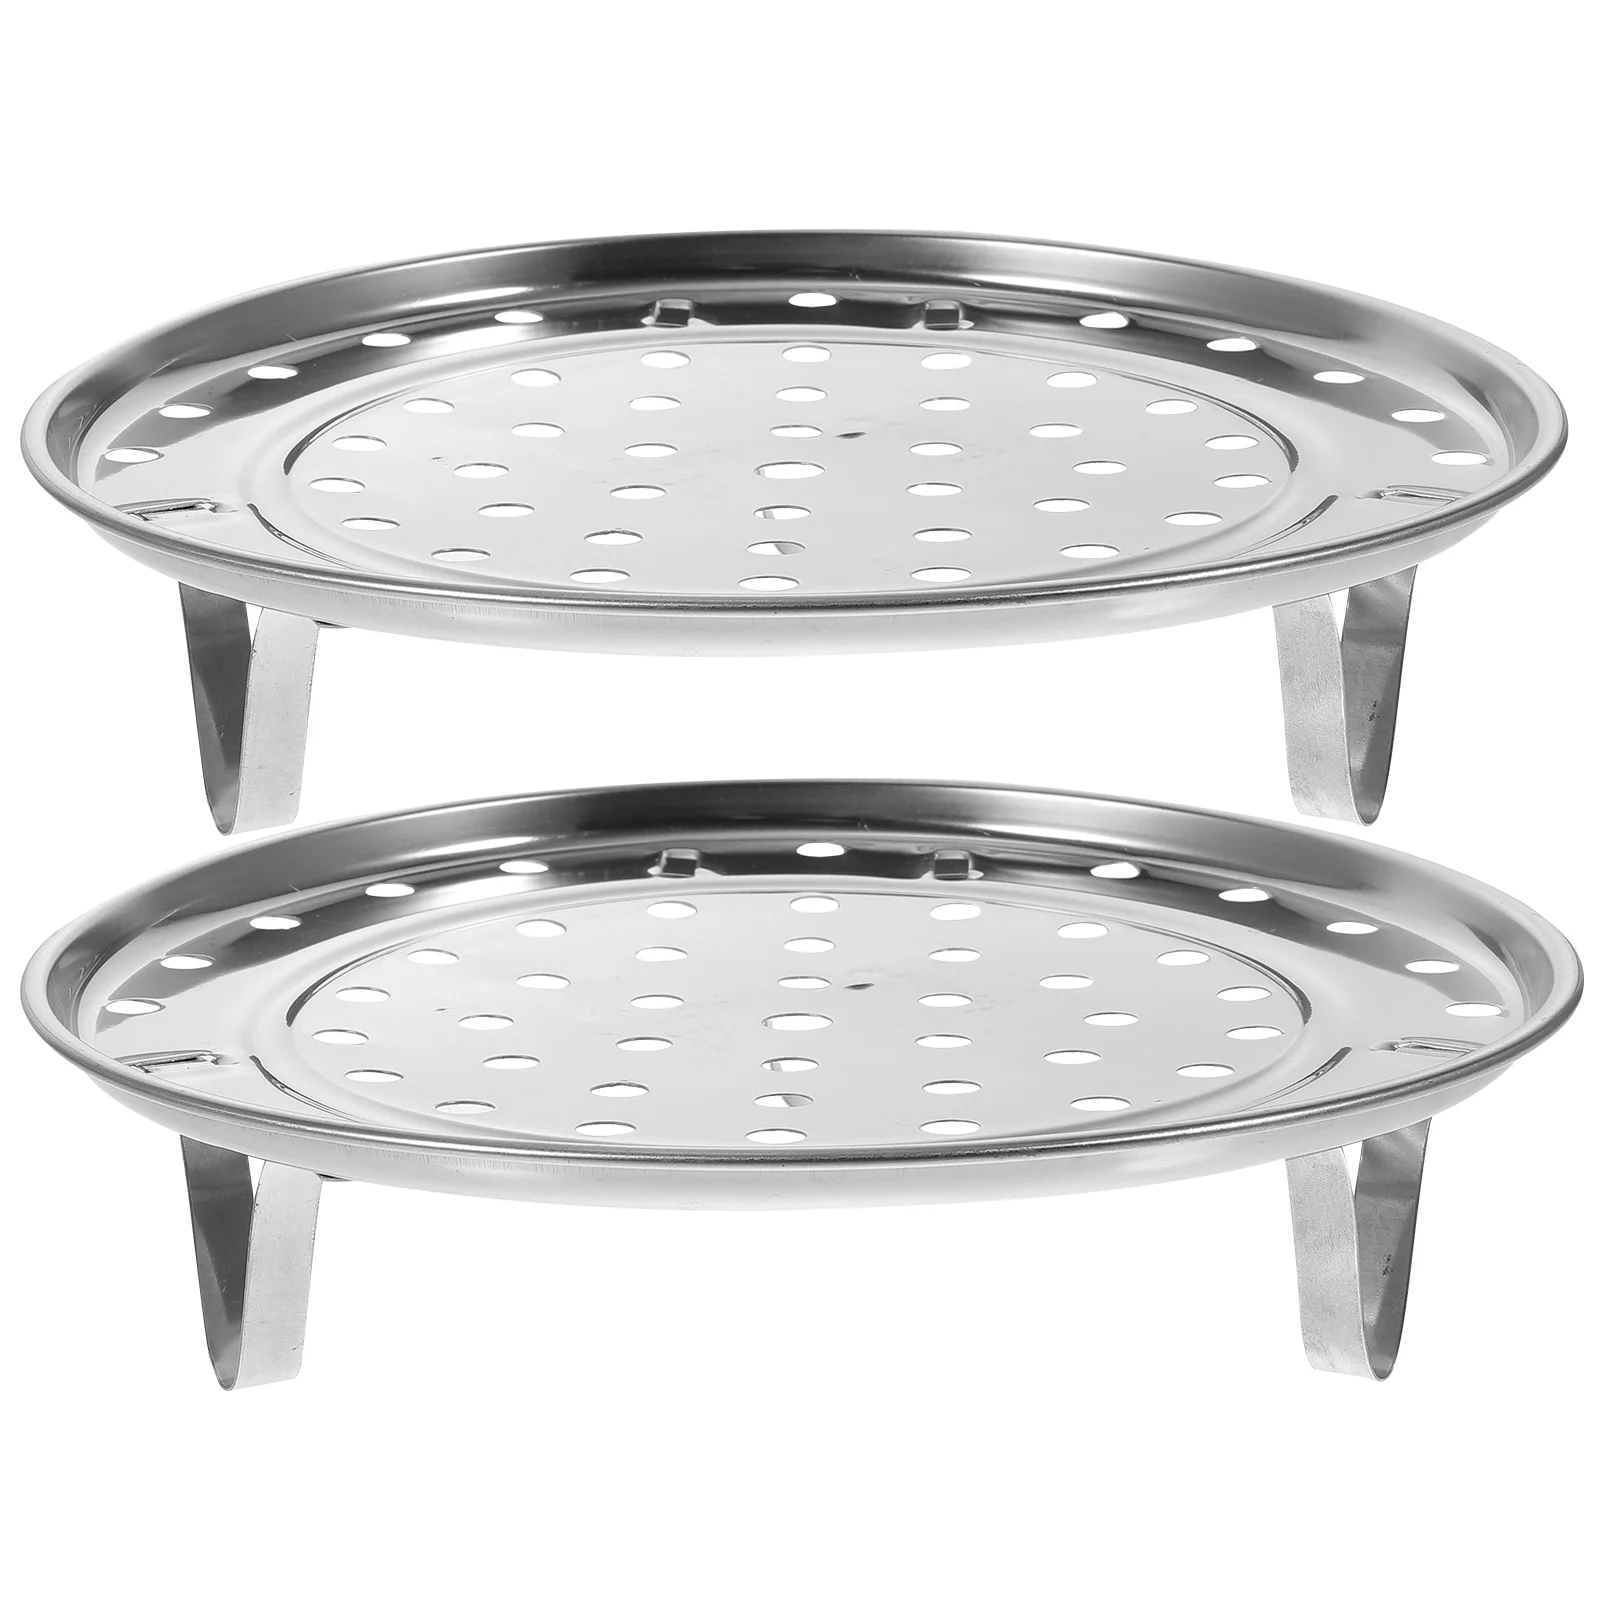 

Rack Steamer Pot Steam Steaming Cooking Food Canning Trivet Round Stand Baskets Basket Steel Stainless Cooker Tray Stock Cooling